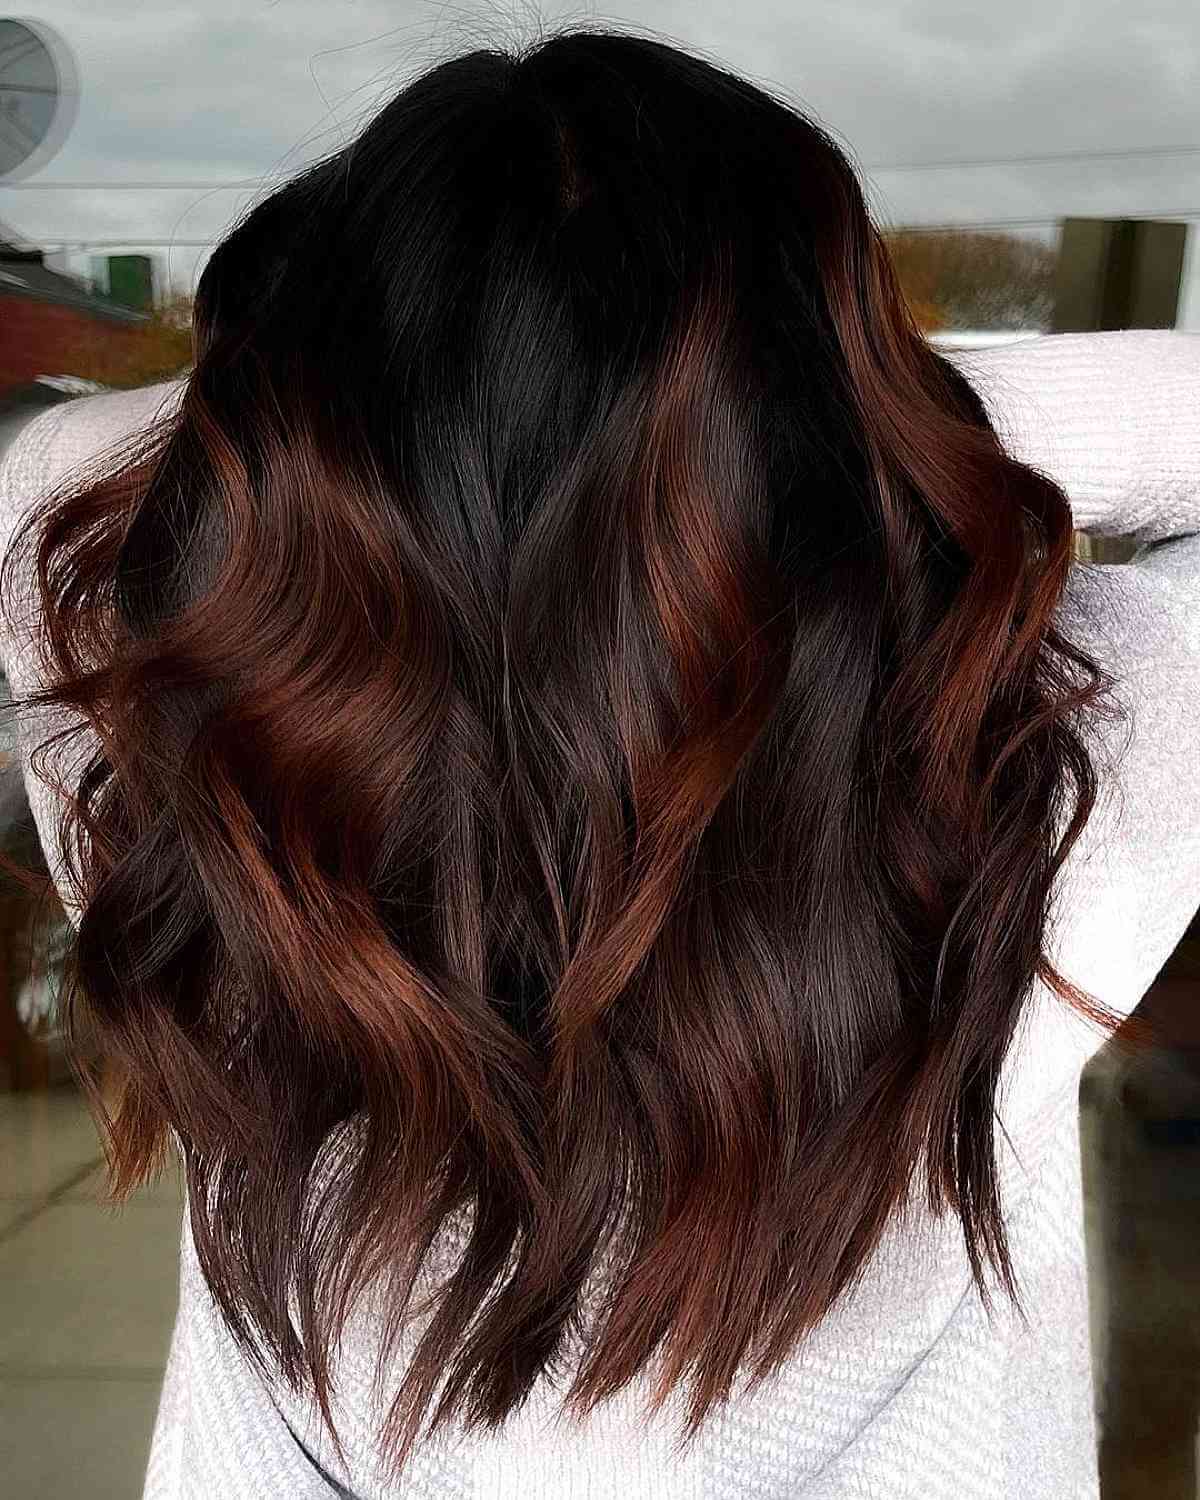 Natural Black with Reddish Brown Hairstyle